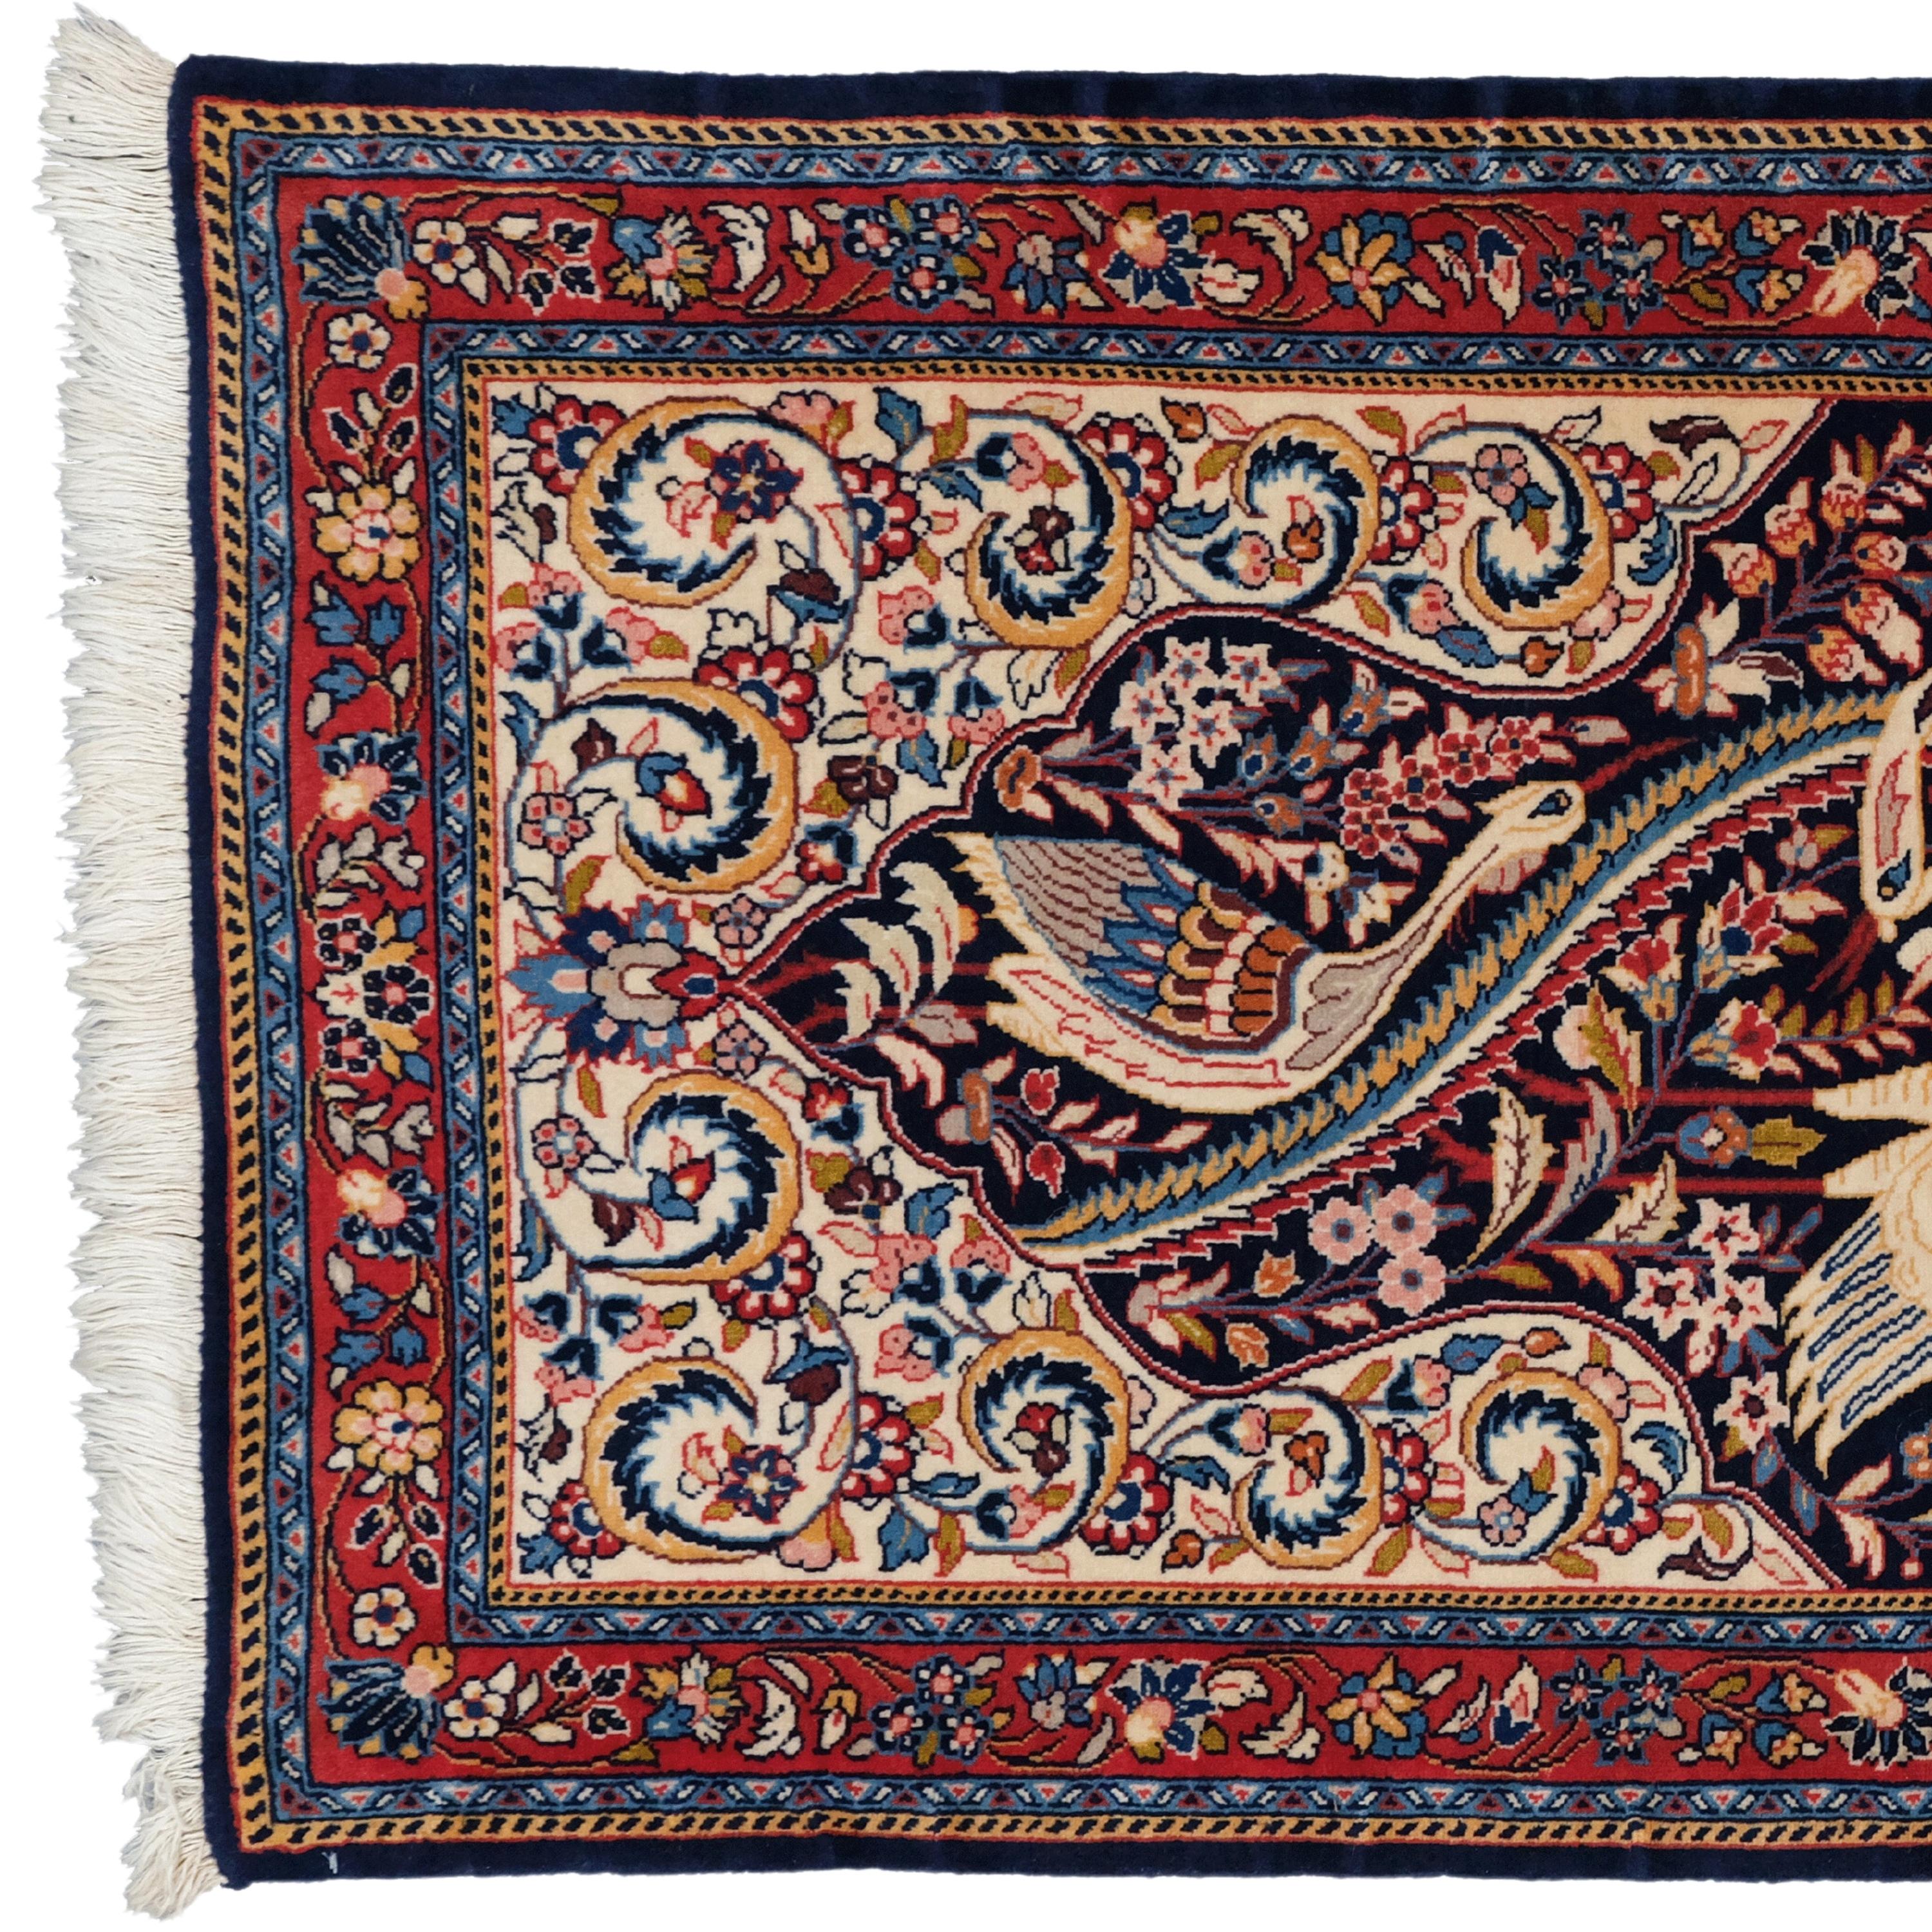 19th Century Pictorial Qum Rug

This extraordinary carpet will fascinate you with its illustrated design and vibrant colors that reflect the rich history and craftsmanship of the period. Each stitch tells the story of skilled craftsmen who